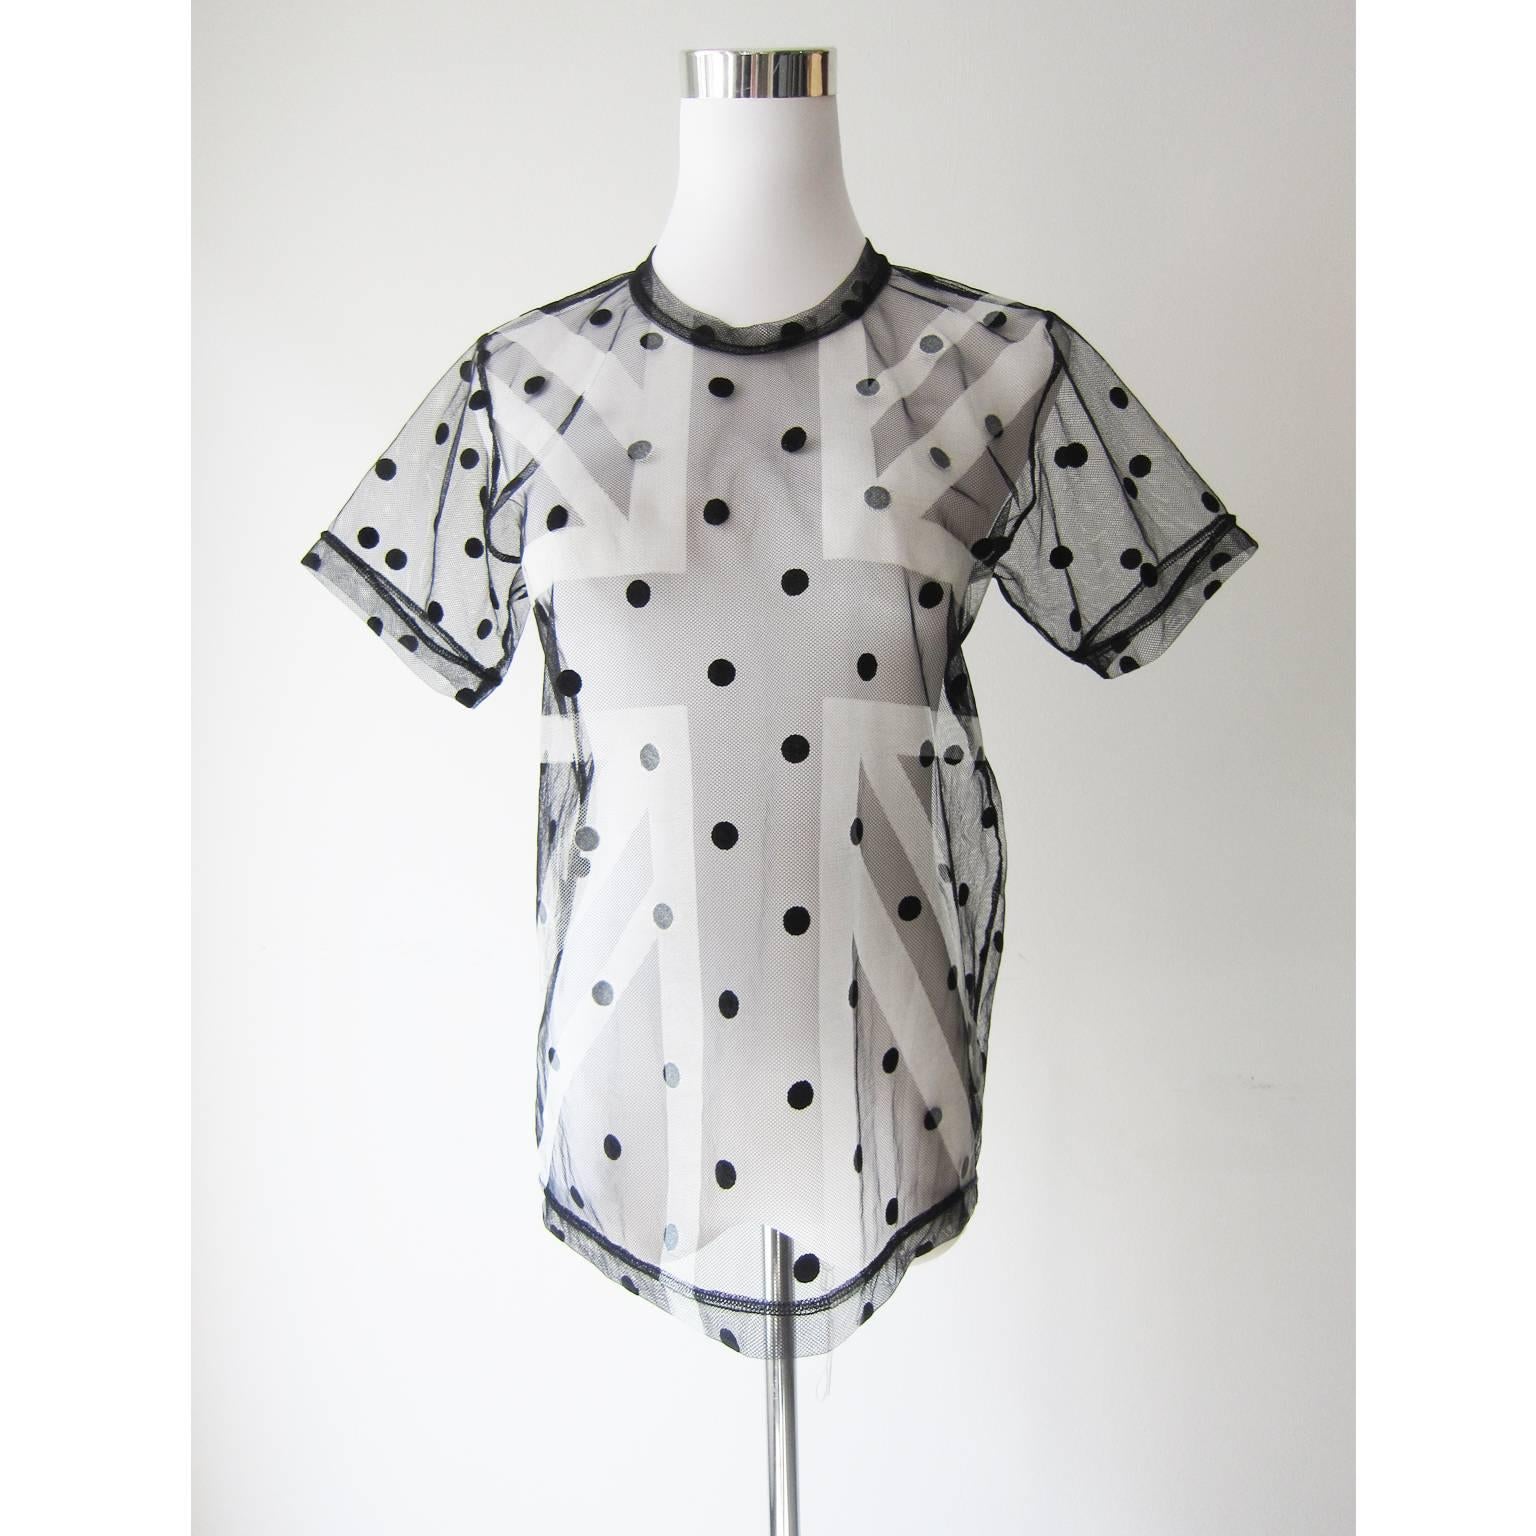 Comme des Garcons spaghetti polka dots tulle T shirt featuring union jack printed from AD 2005. 
Size : M